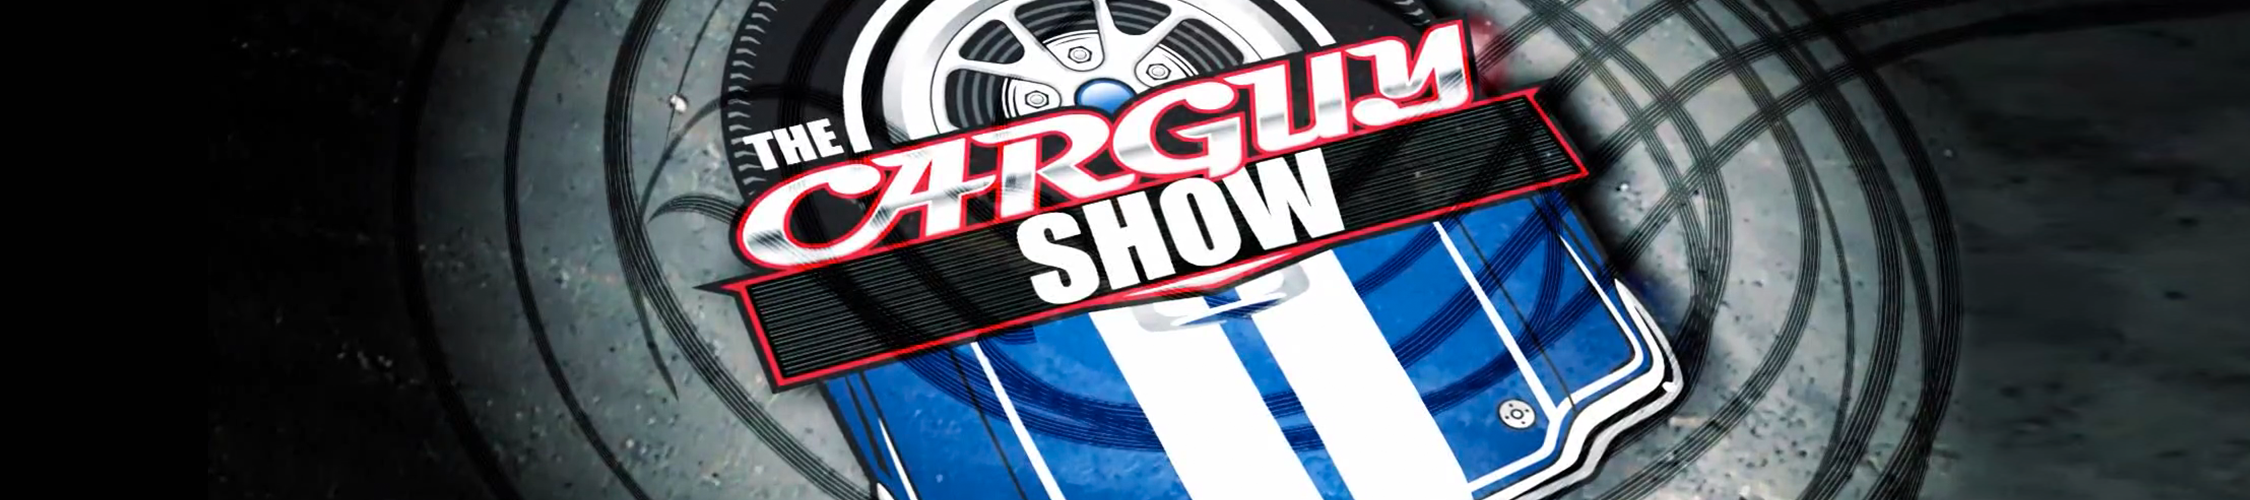 About The Car Guy Show